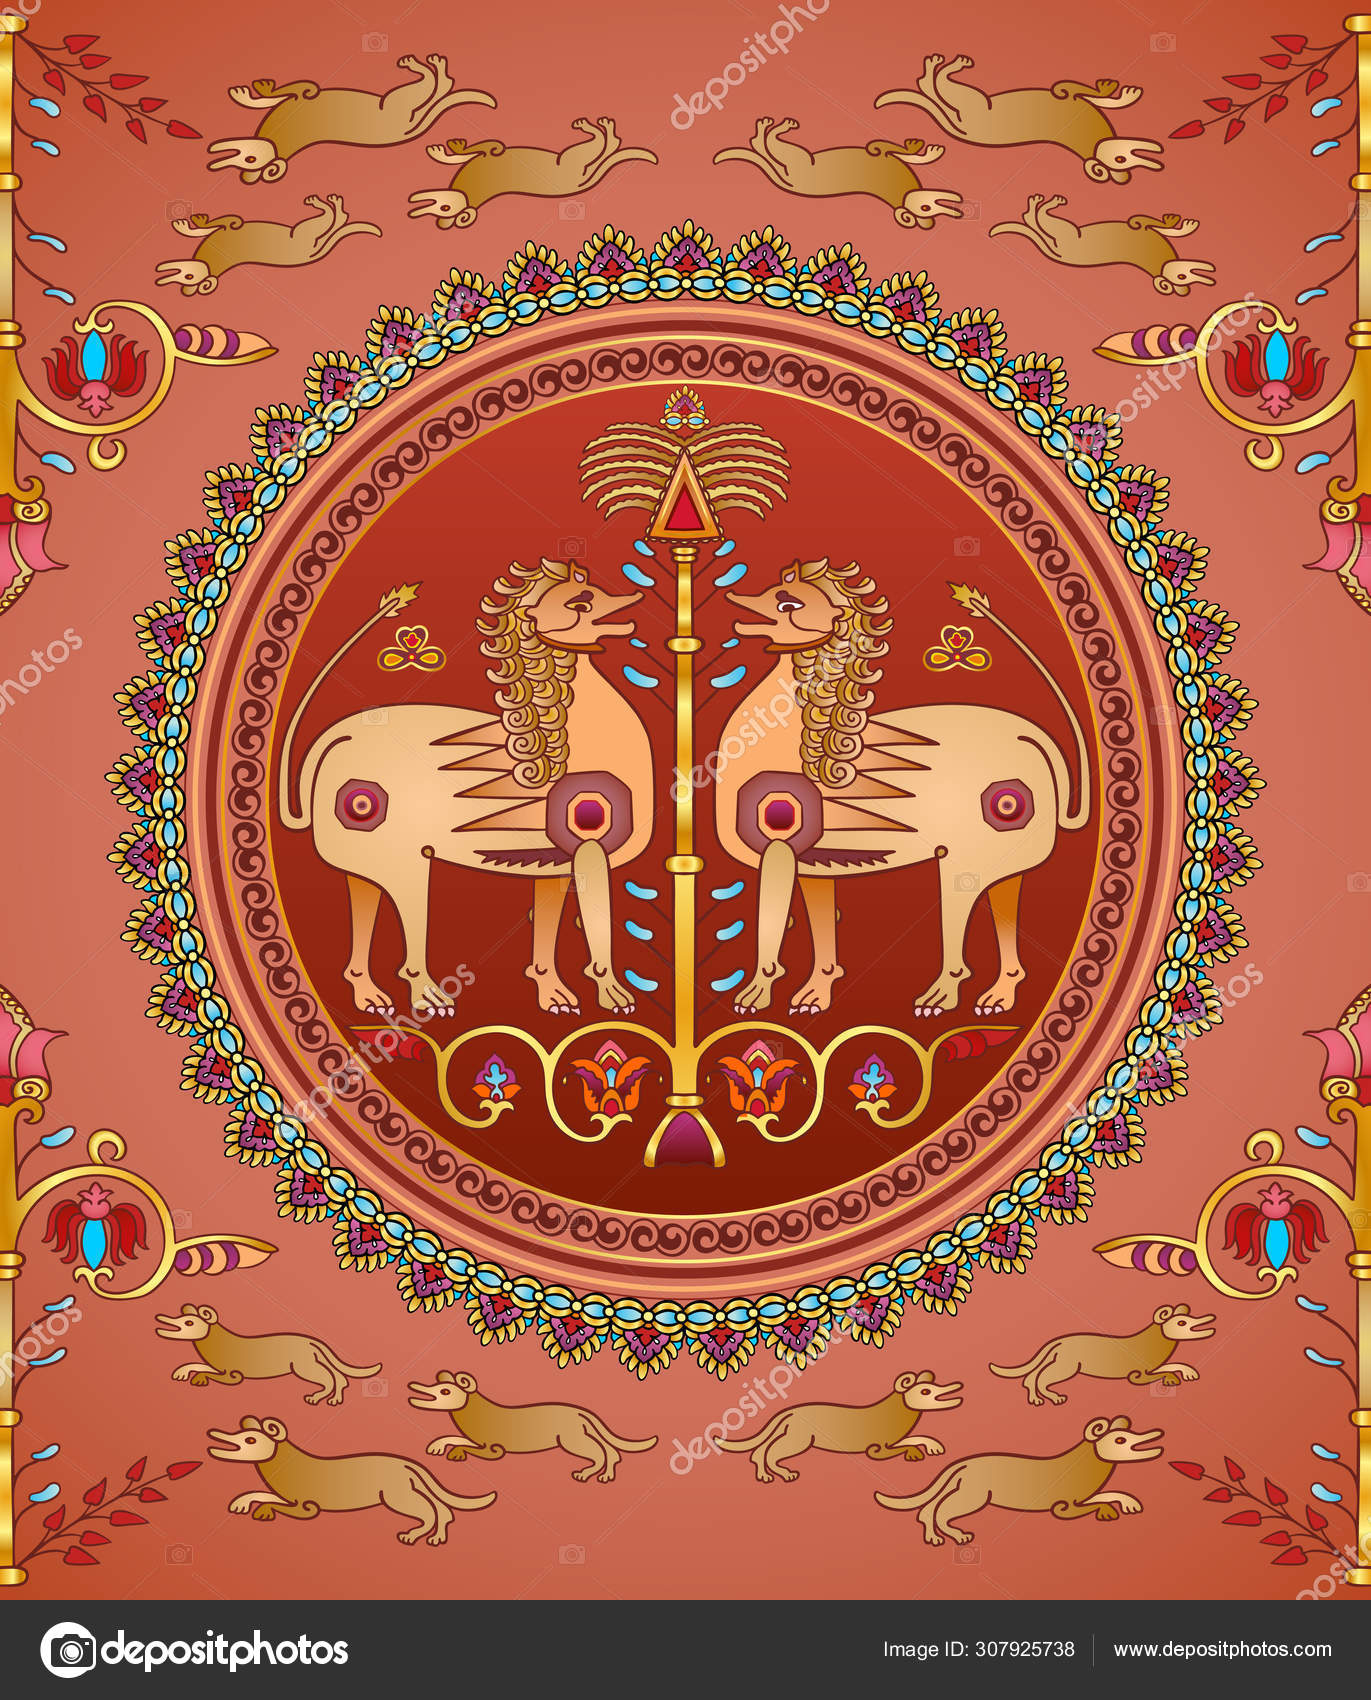 Colorful Vector Arabian Islamic Seamless Textile Pattern With The Image Of Lion In Circle Hounds And Ornamental Trees In Terracotta Red And Gold Colors Stock Vector C Natalya Volodeva 307925738